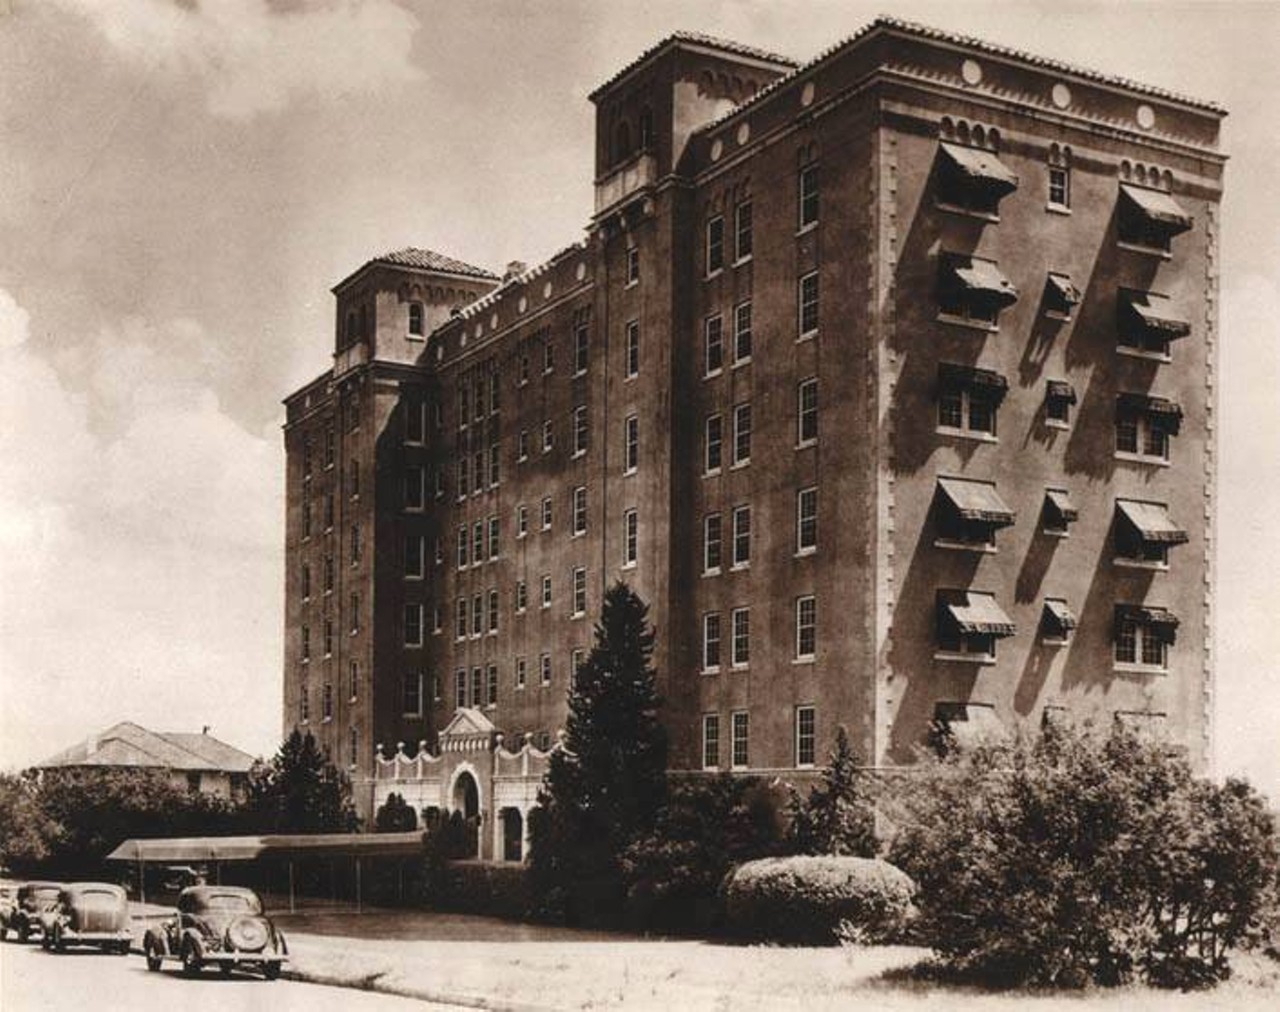 The Bushnell Apartment Building, built in 1927.